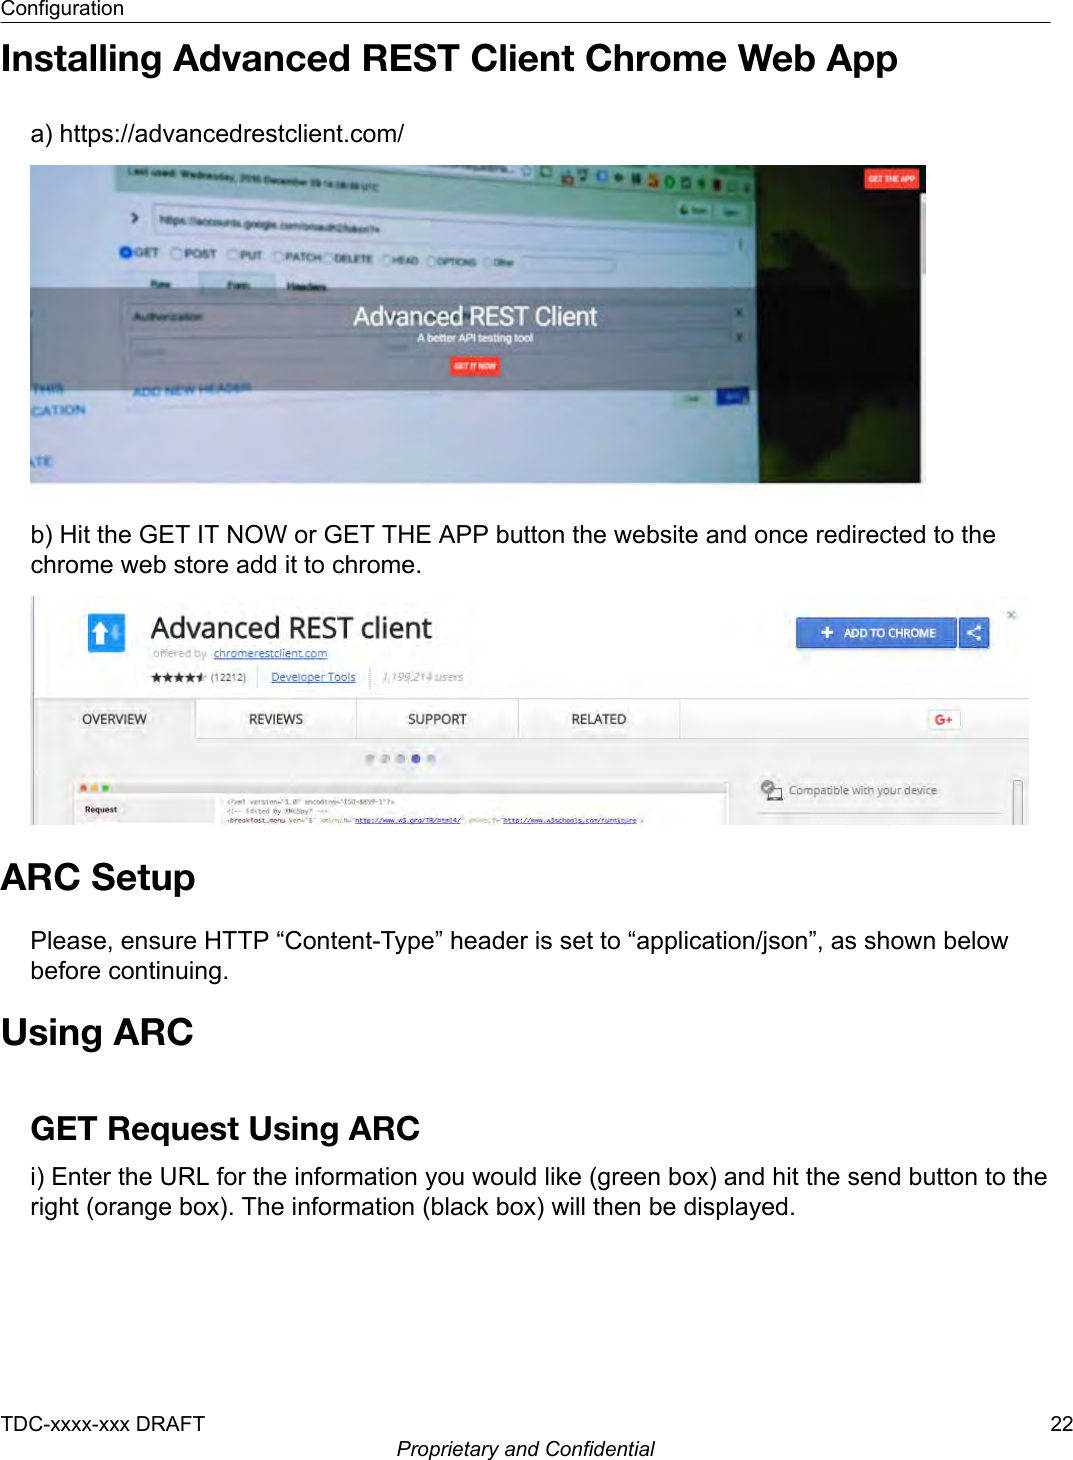 Installing Advanced REST Client Chrome Web Appa) https://advancedrestclient.com/b) Hit the GET IT NOW or GET THE APP button the website and once redirected to thechrome web store add it to chrome.ARC SetupPlease, ensure HTTP “Content-Type” header is set to “application/json”, as shown belowbefore continuing.Using ARCGET Request Using ARCi) Enter the URL for the information you would like (green box) and hit the send button to theright (orange box). The information (black box) will then be displayed.ConfigurationTDC-xxxx-xxx DRAFT 22Proprietary and Confidential